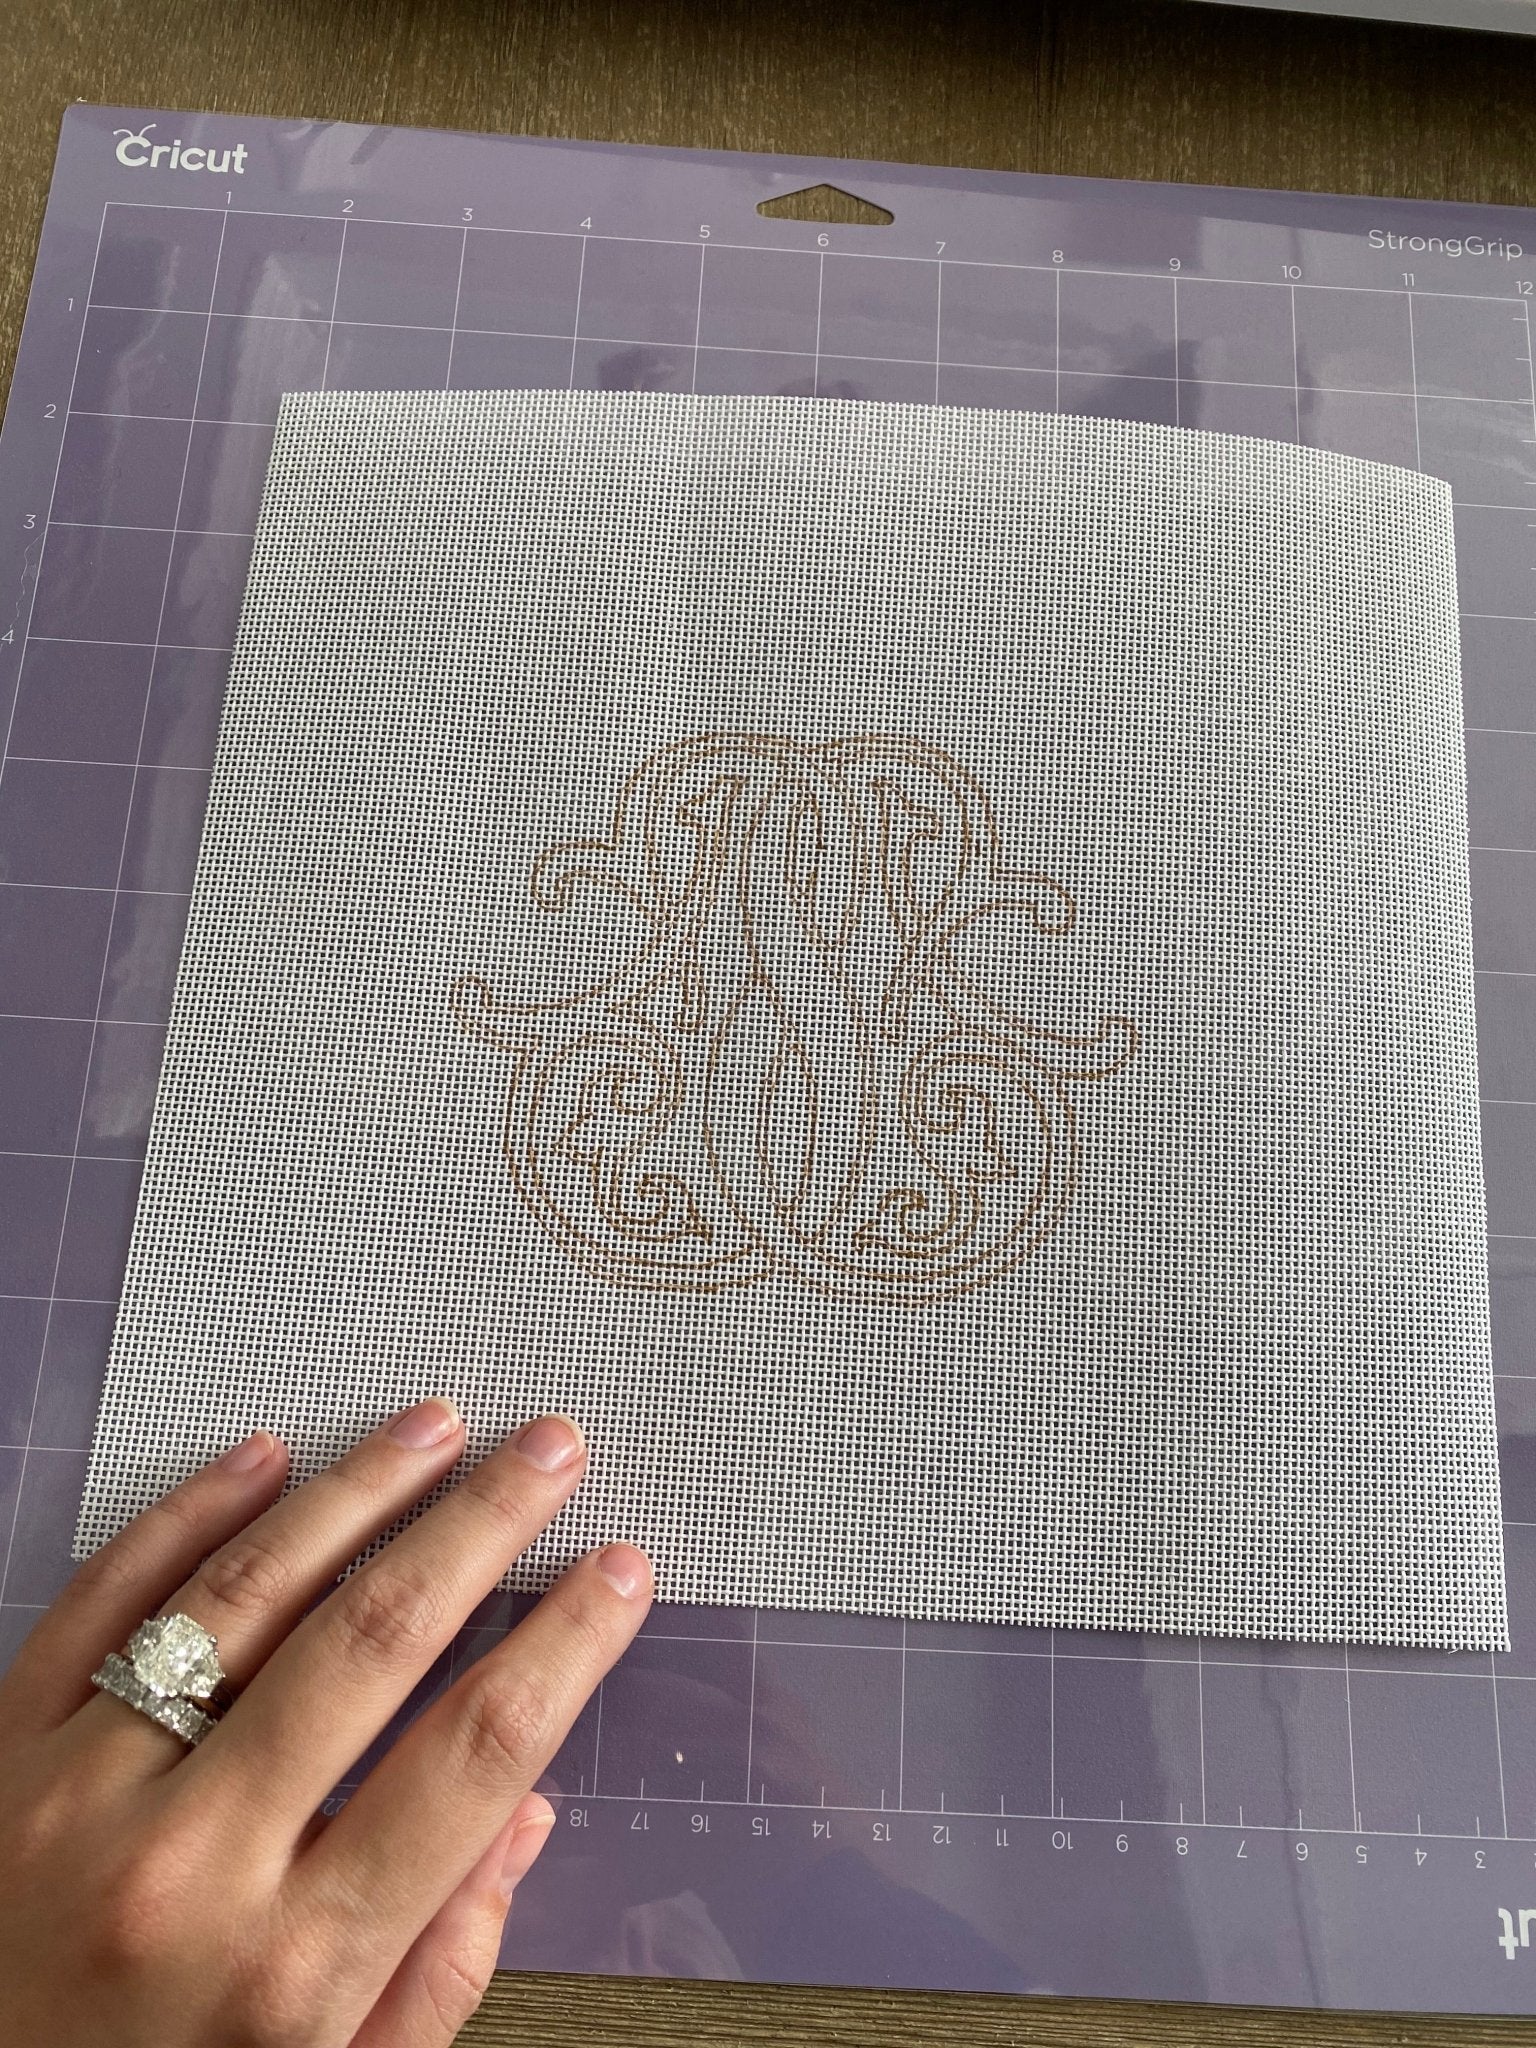 How-To: Using a Cricut to make a Needlepoint Canvas – Penny Linn Designs